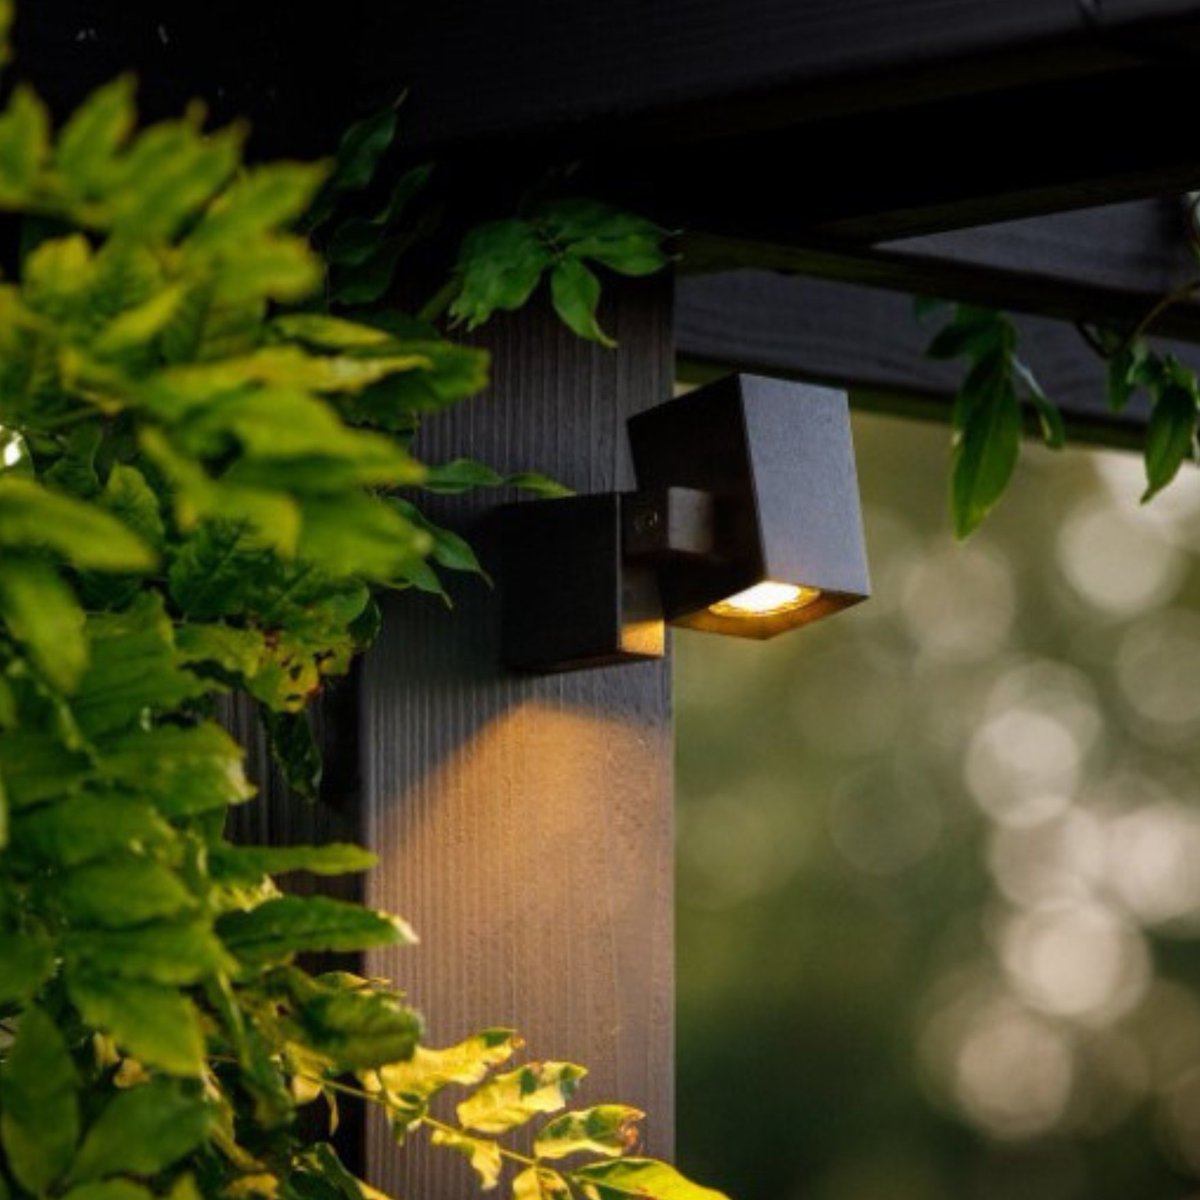 Searching for a sleek wall light to complement your existing lighting setup? Your quest ends here with our 12V Quartz Wall Light! 💡

#dreamhome #homeinspo #lightingdesign #outdoorliving #outdoor #homedecor #design #gardendesign #interiordesign #gardendesigner #landscapedesign